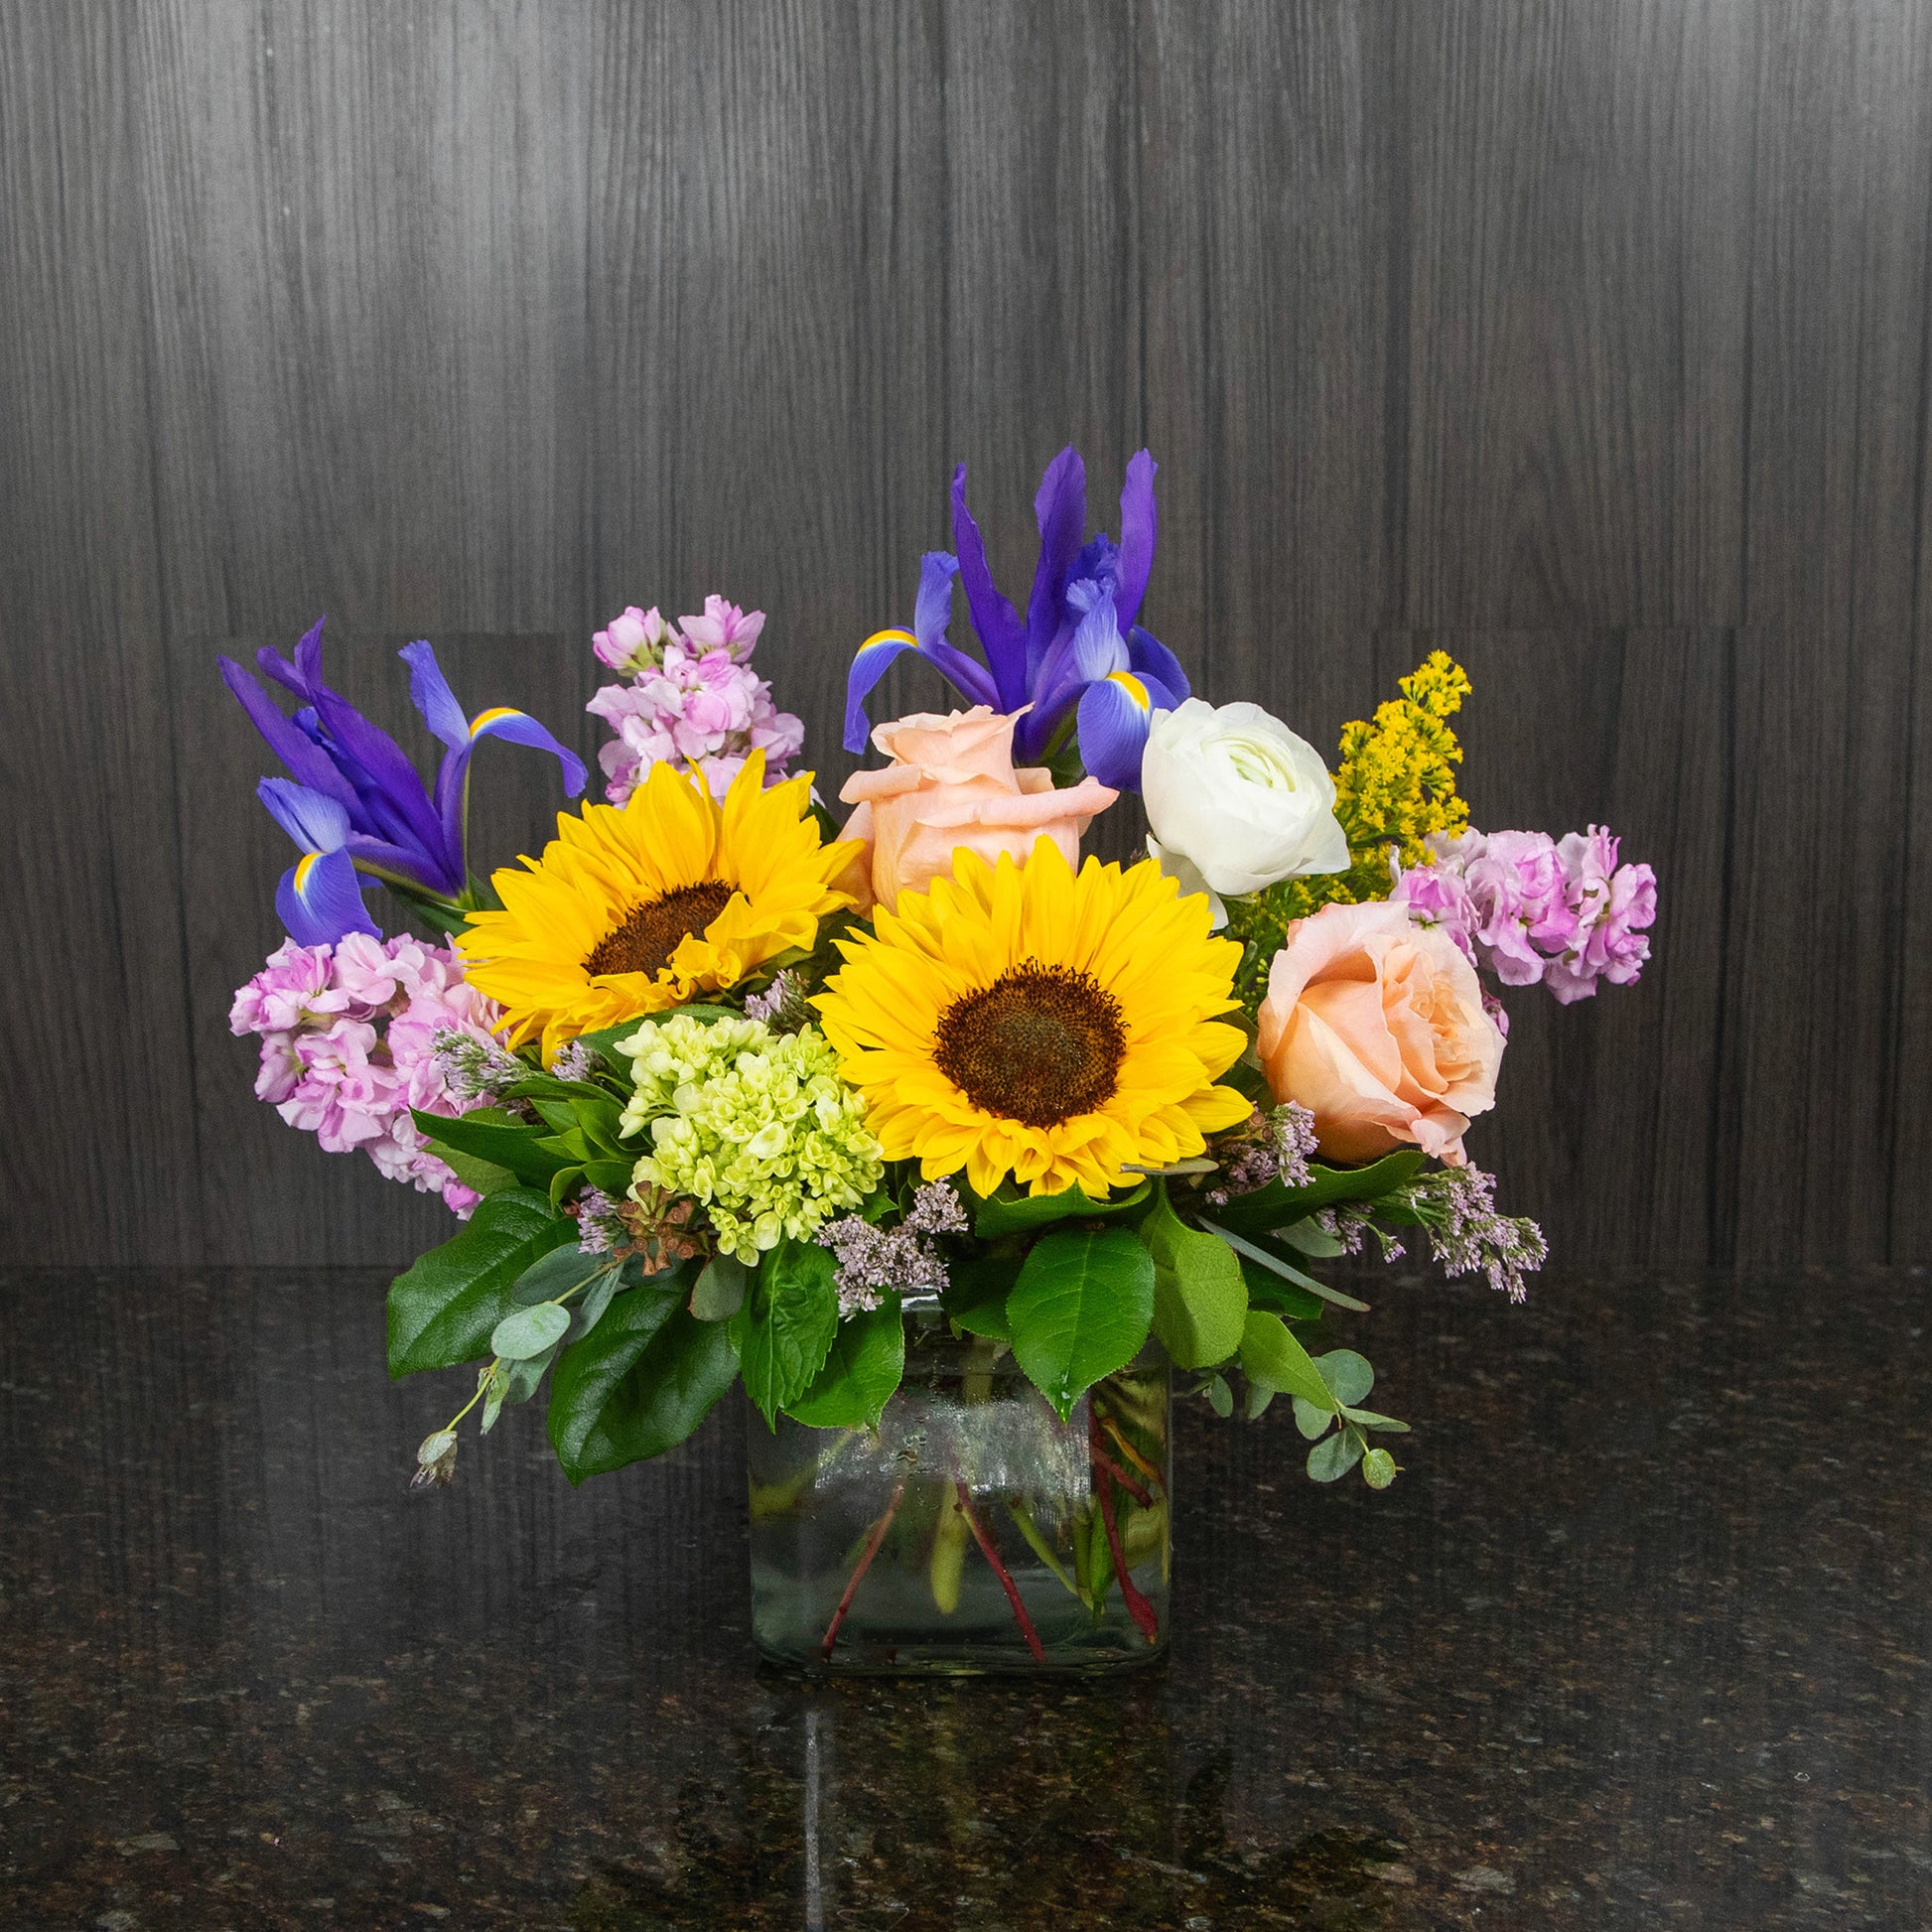 a colorful flower arrangement with sunflowers and other cheerful flowers in a glass cube vase